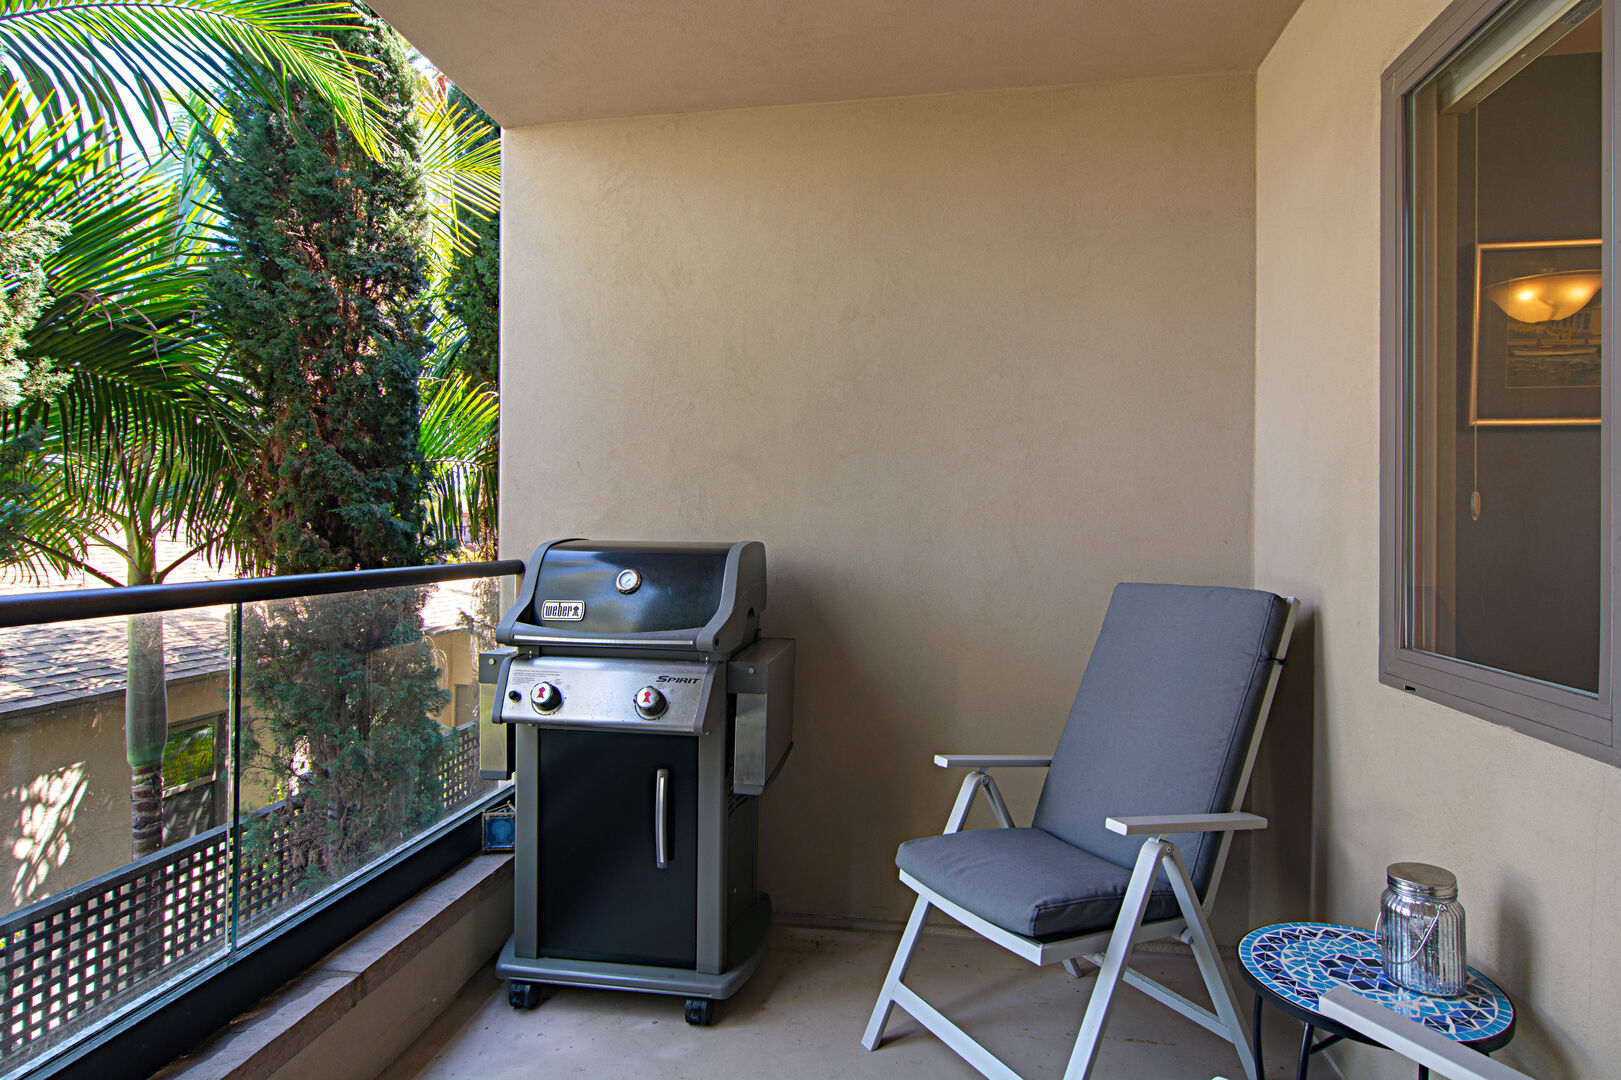 Lower balcony with seating for 2 and BBQ grill